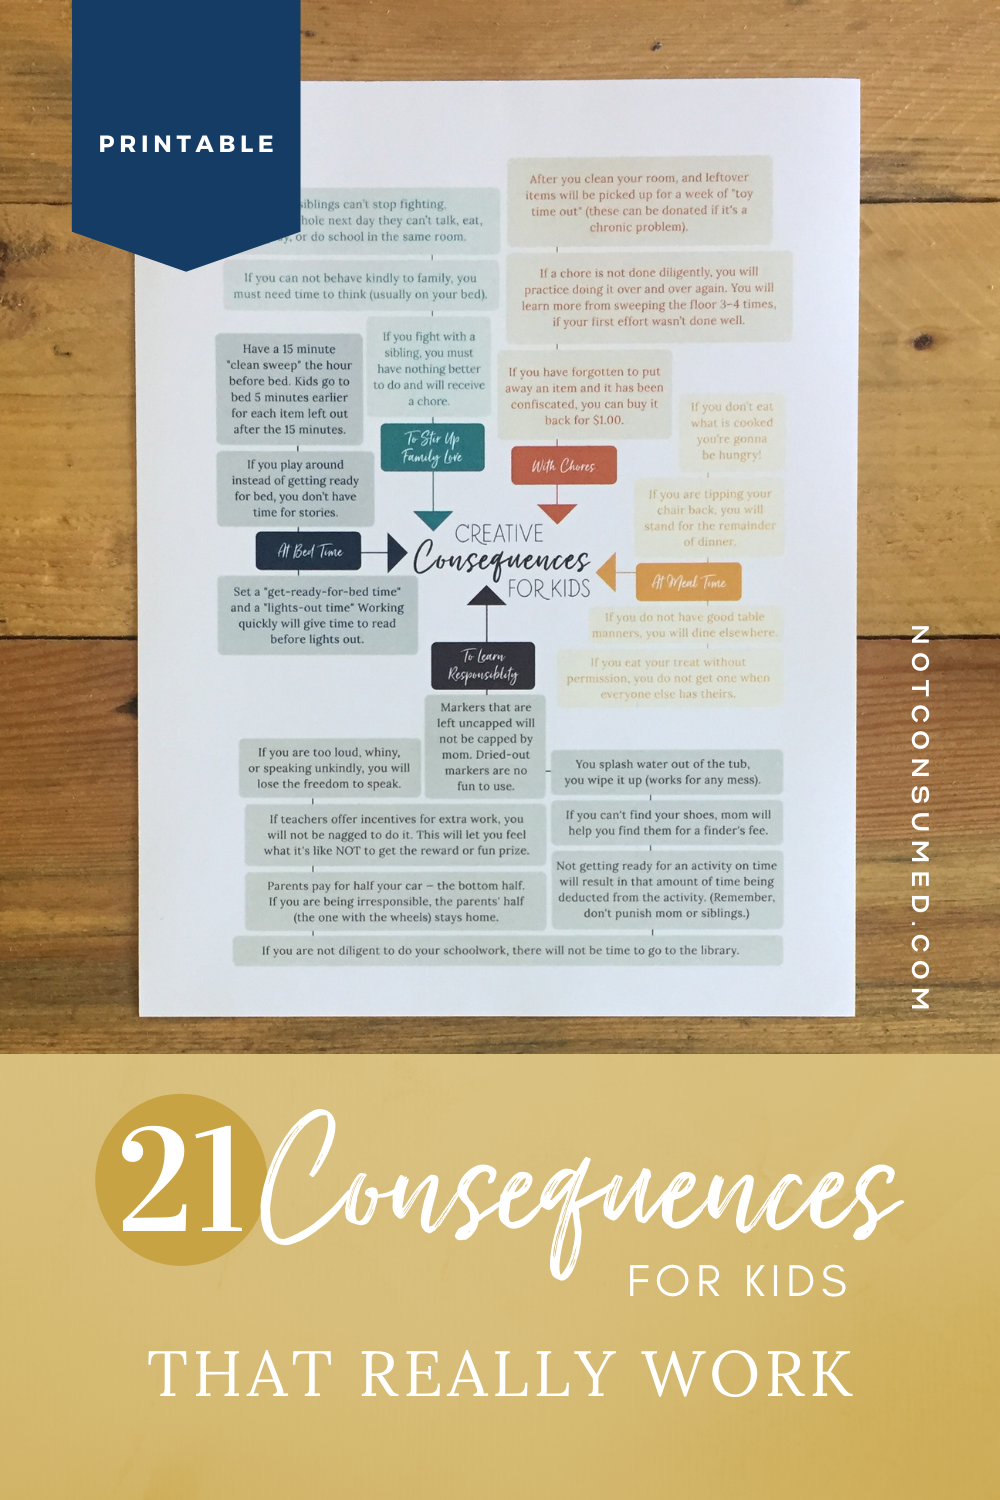 21 Consequences